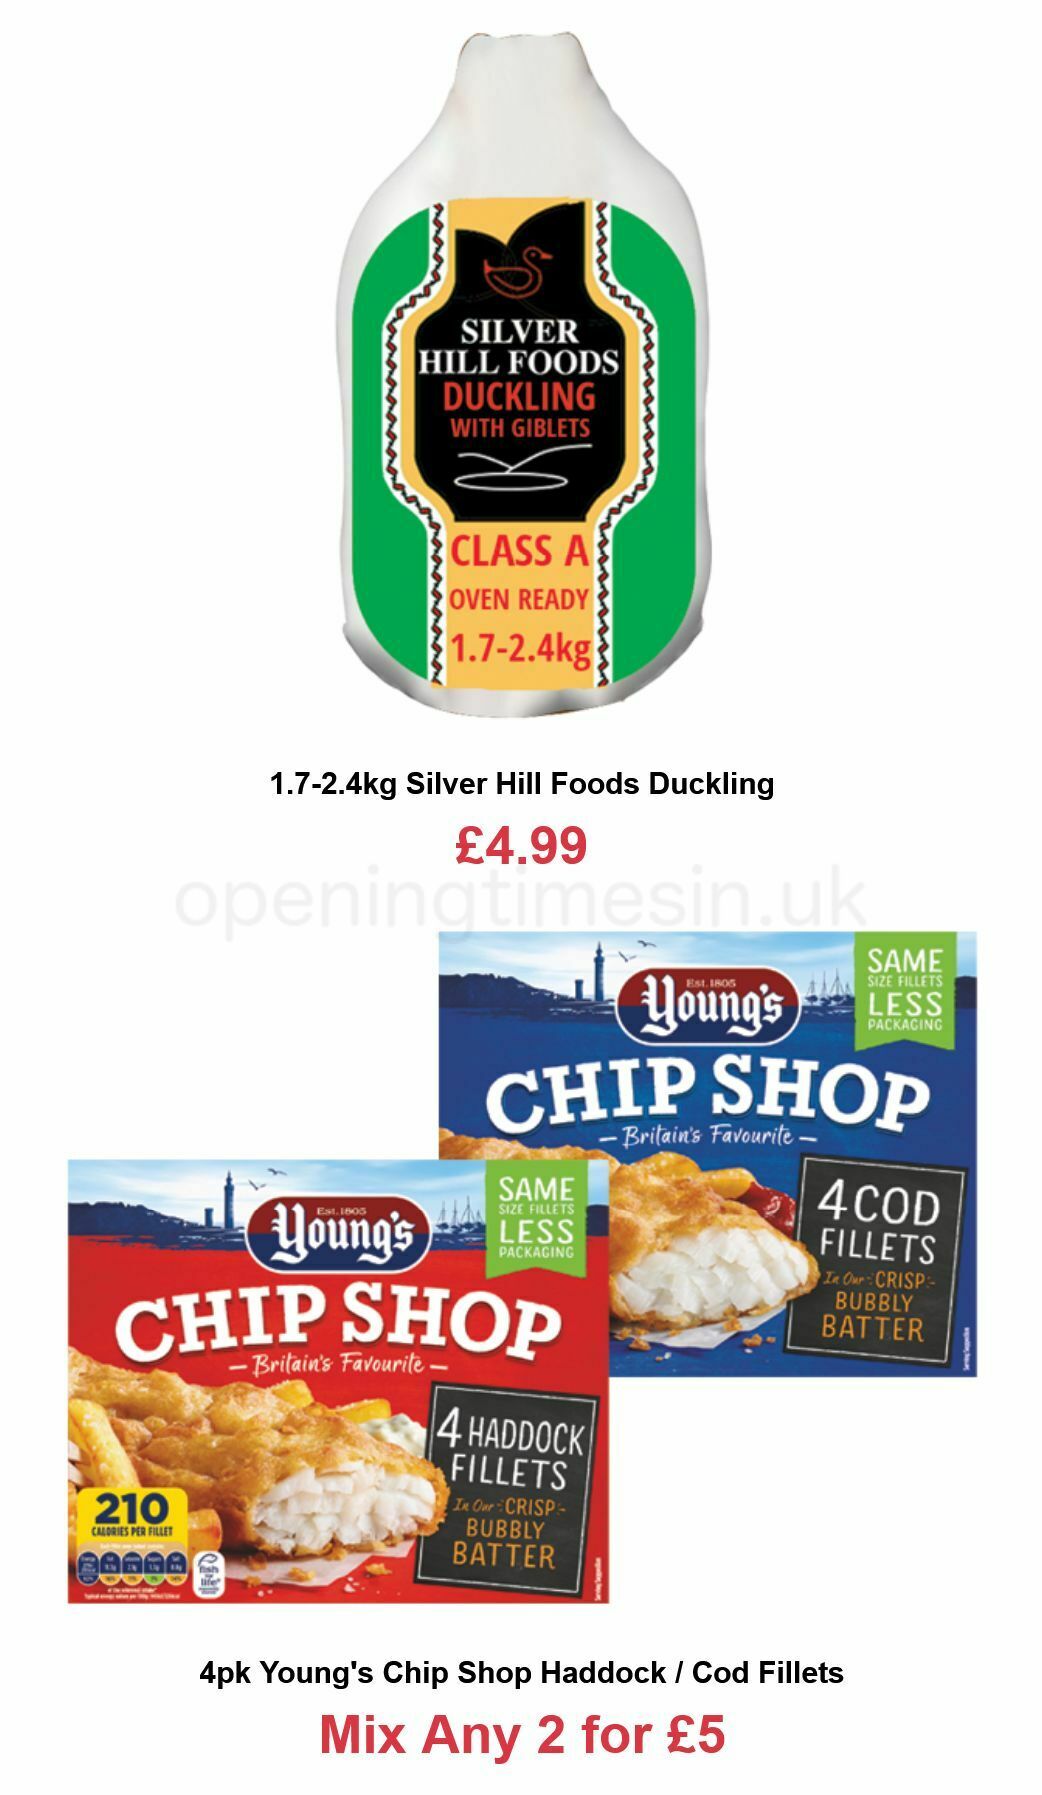 Farmfoods Offers from 10 November